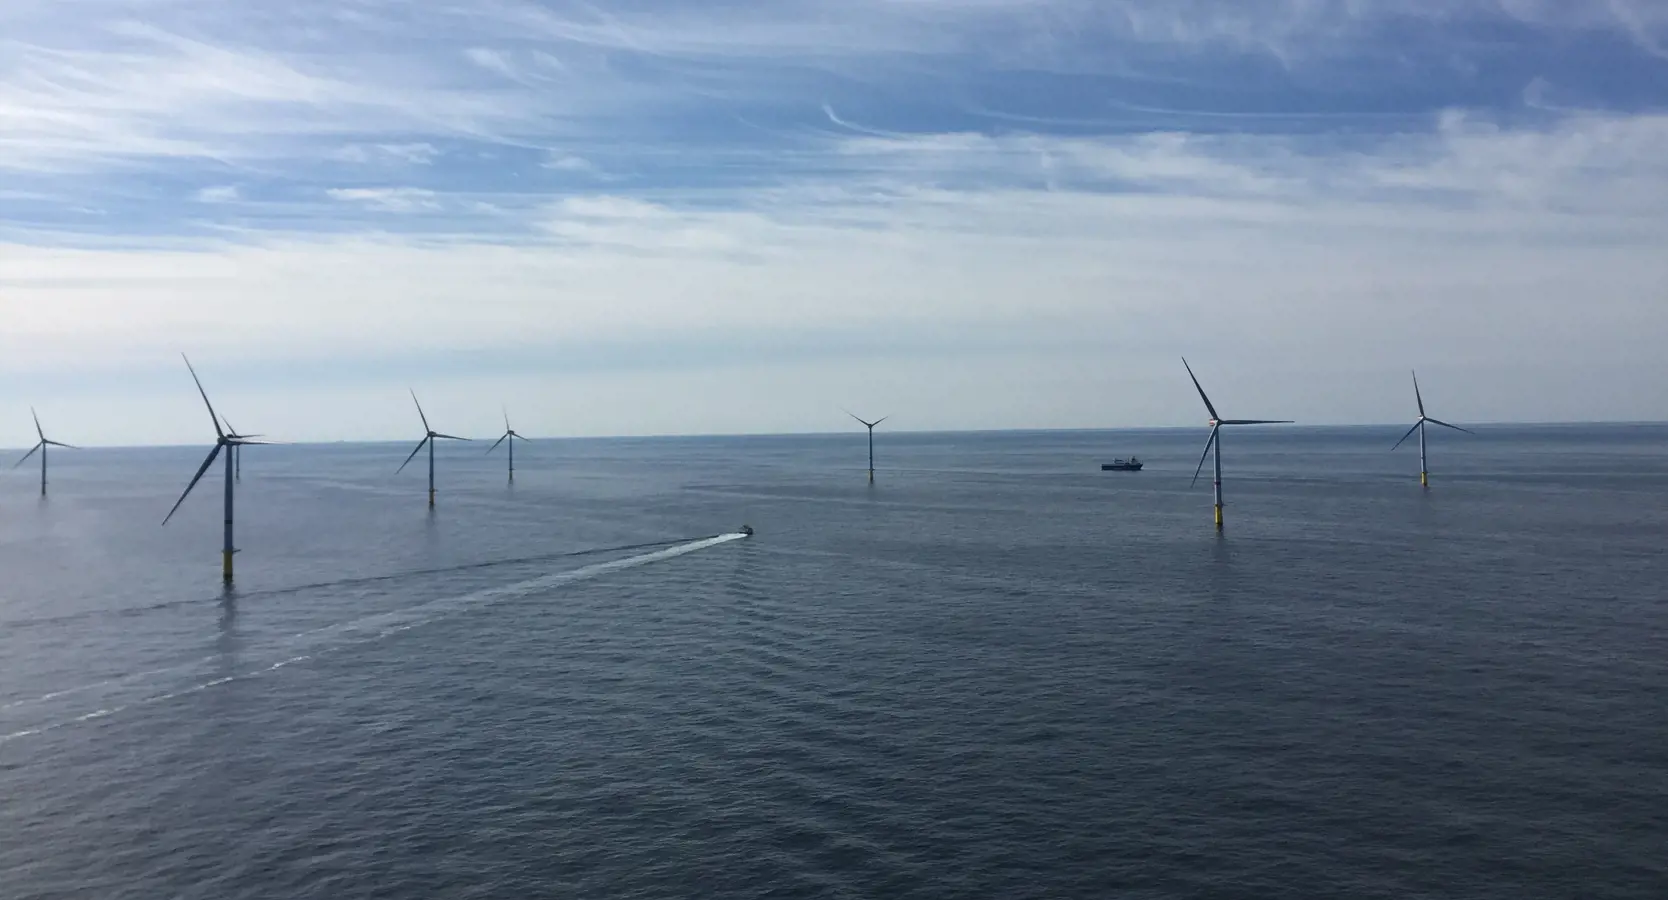 An image of a windmill farm situated in the ocean. Two ships are sailing between the windmills. The offshore windmill park is called: the Changfang and Xidao Offshore Wind Project.